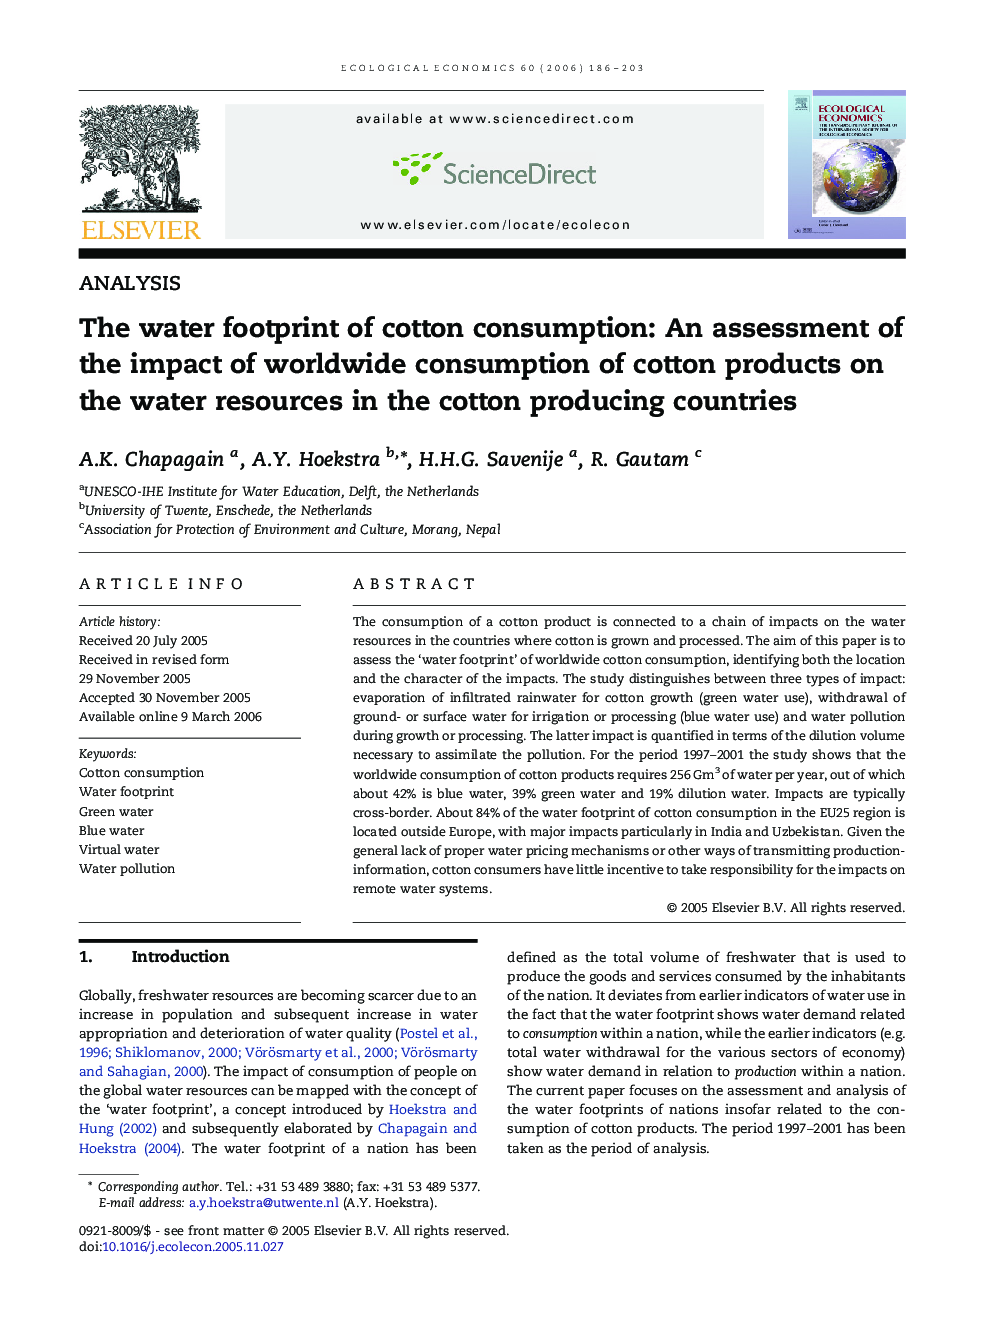 The water footprint of cotton consumption: An assessment of the impact of worldwide consumption of cotton products on the water resources in the cotton producing countries